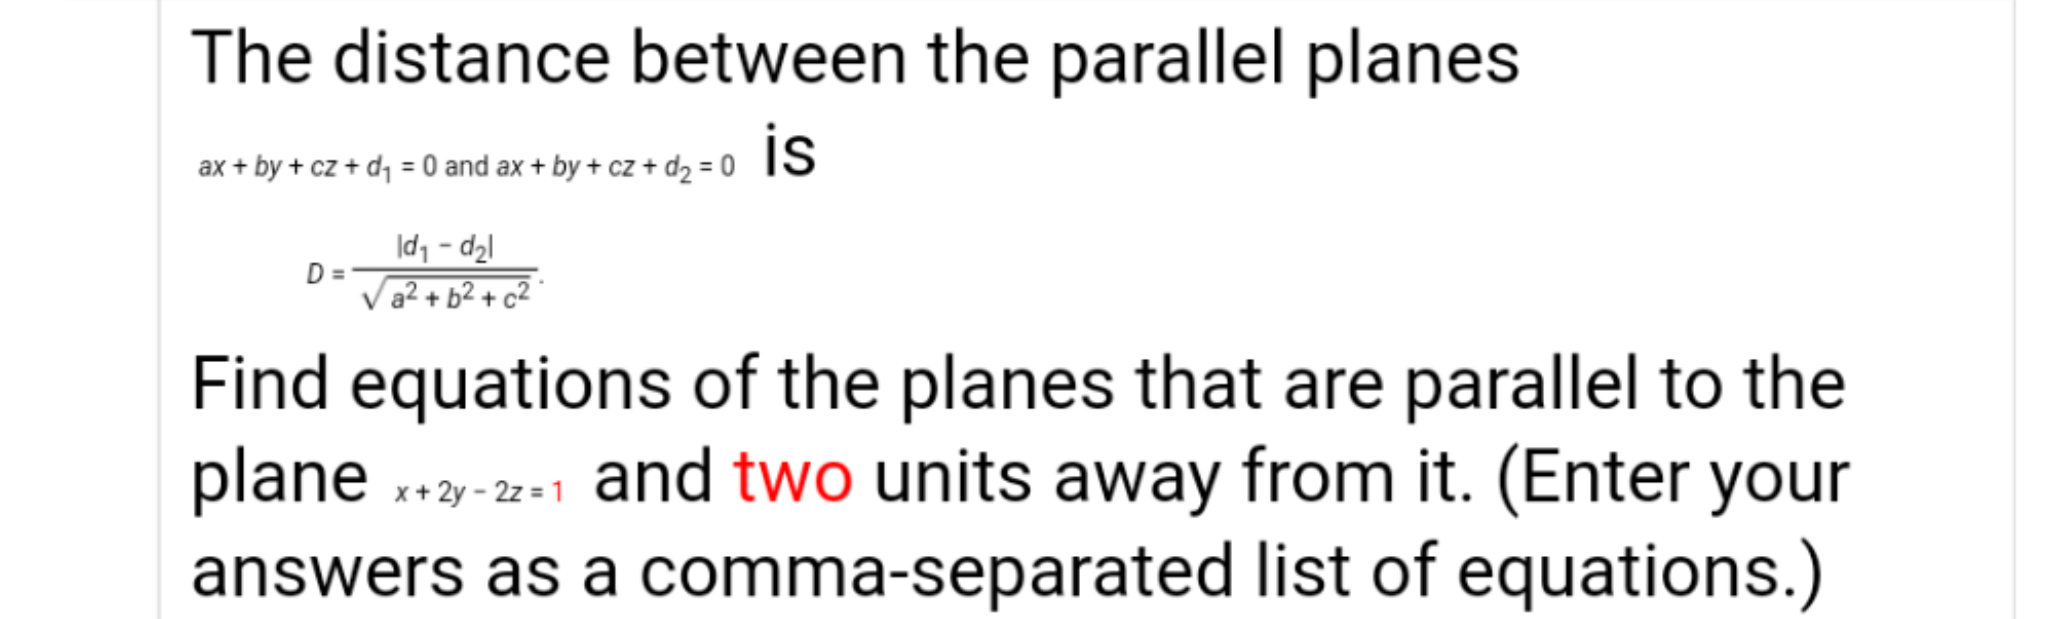 The distance between the parallel planes
ax + by + cz + dq = 0 and ax + by + cz + dz = 0
D =
a² + b2 + cZ °
Find equations of the planes that are parallel to the
plane ..
*3-2-1 and two units away from it. (Enter your
answers as a comma-separated list of equations.)
